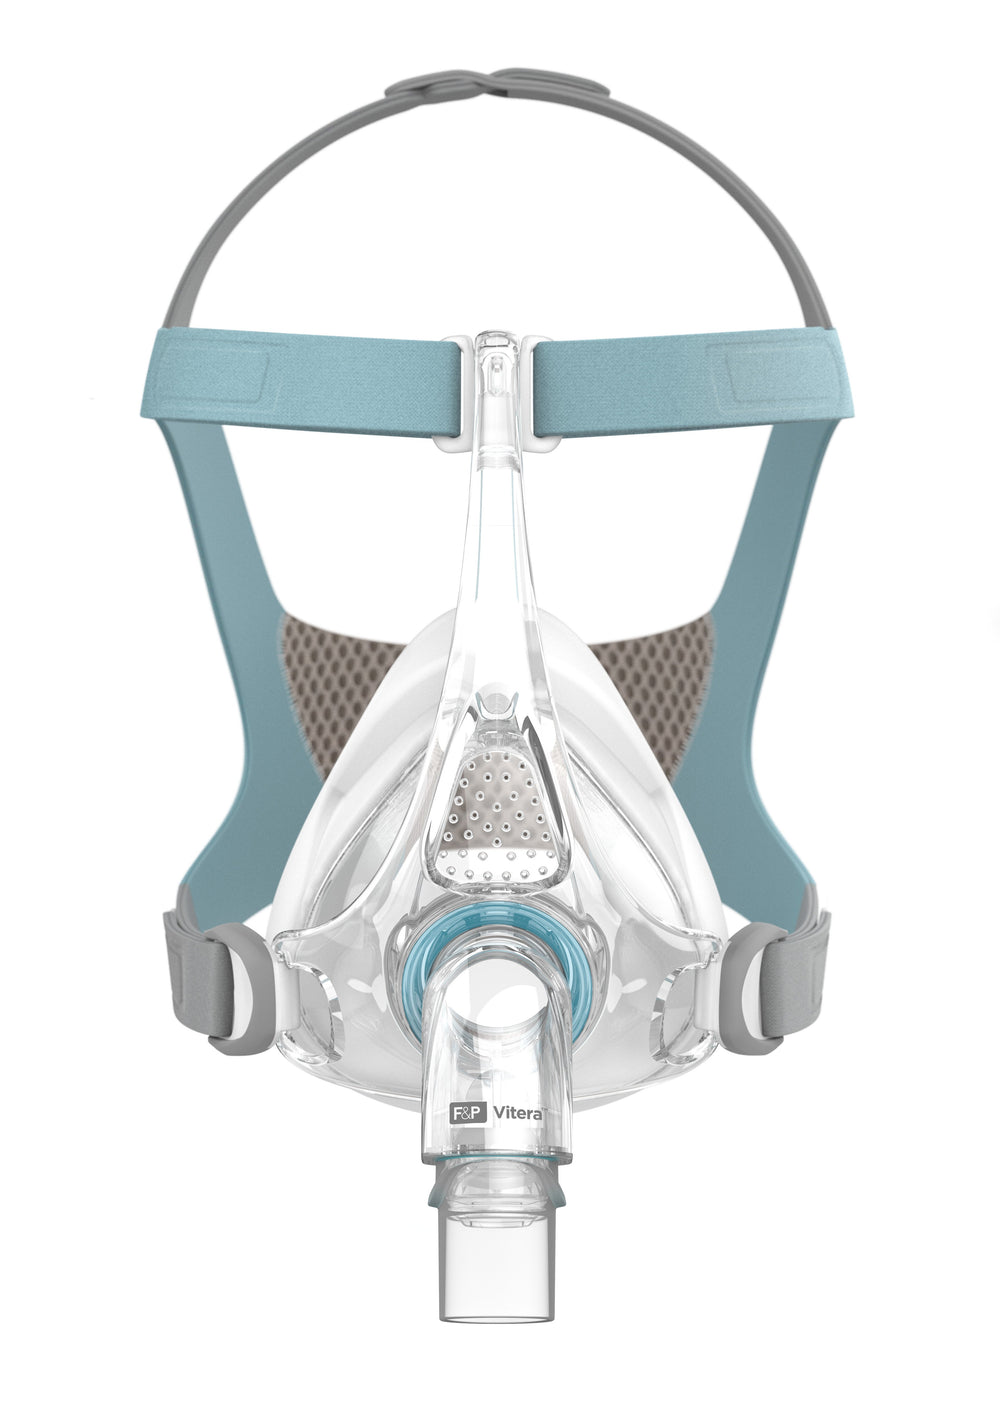 Vitera full face mask - front view